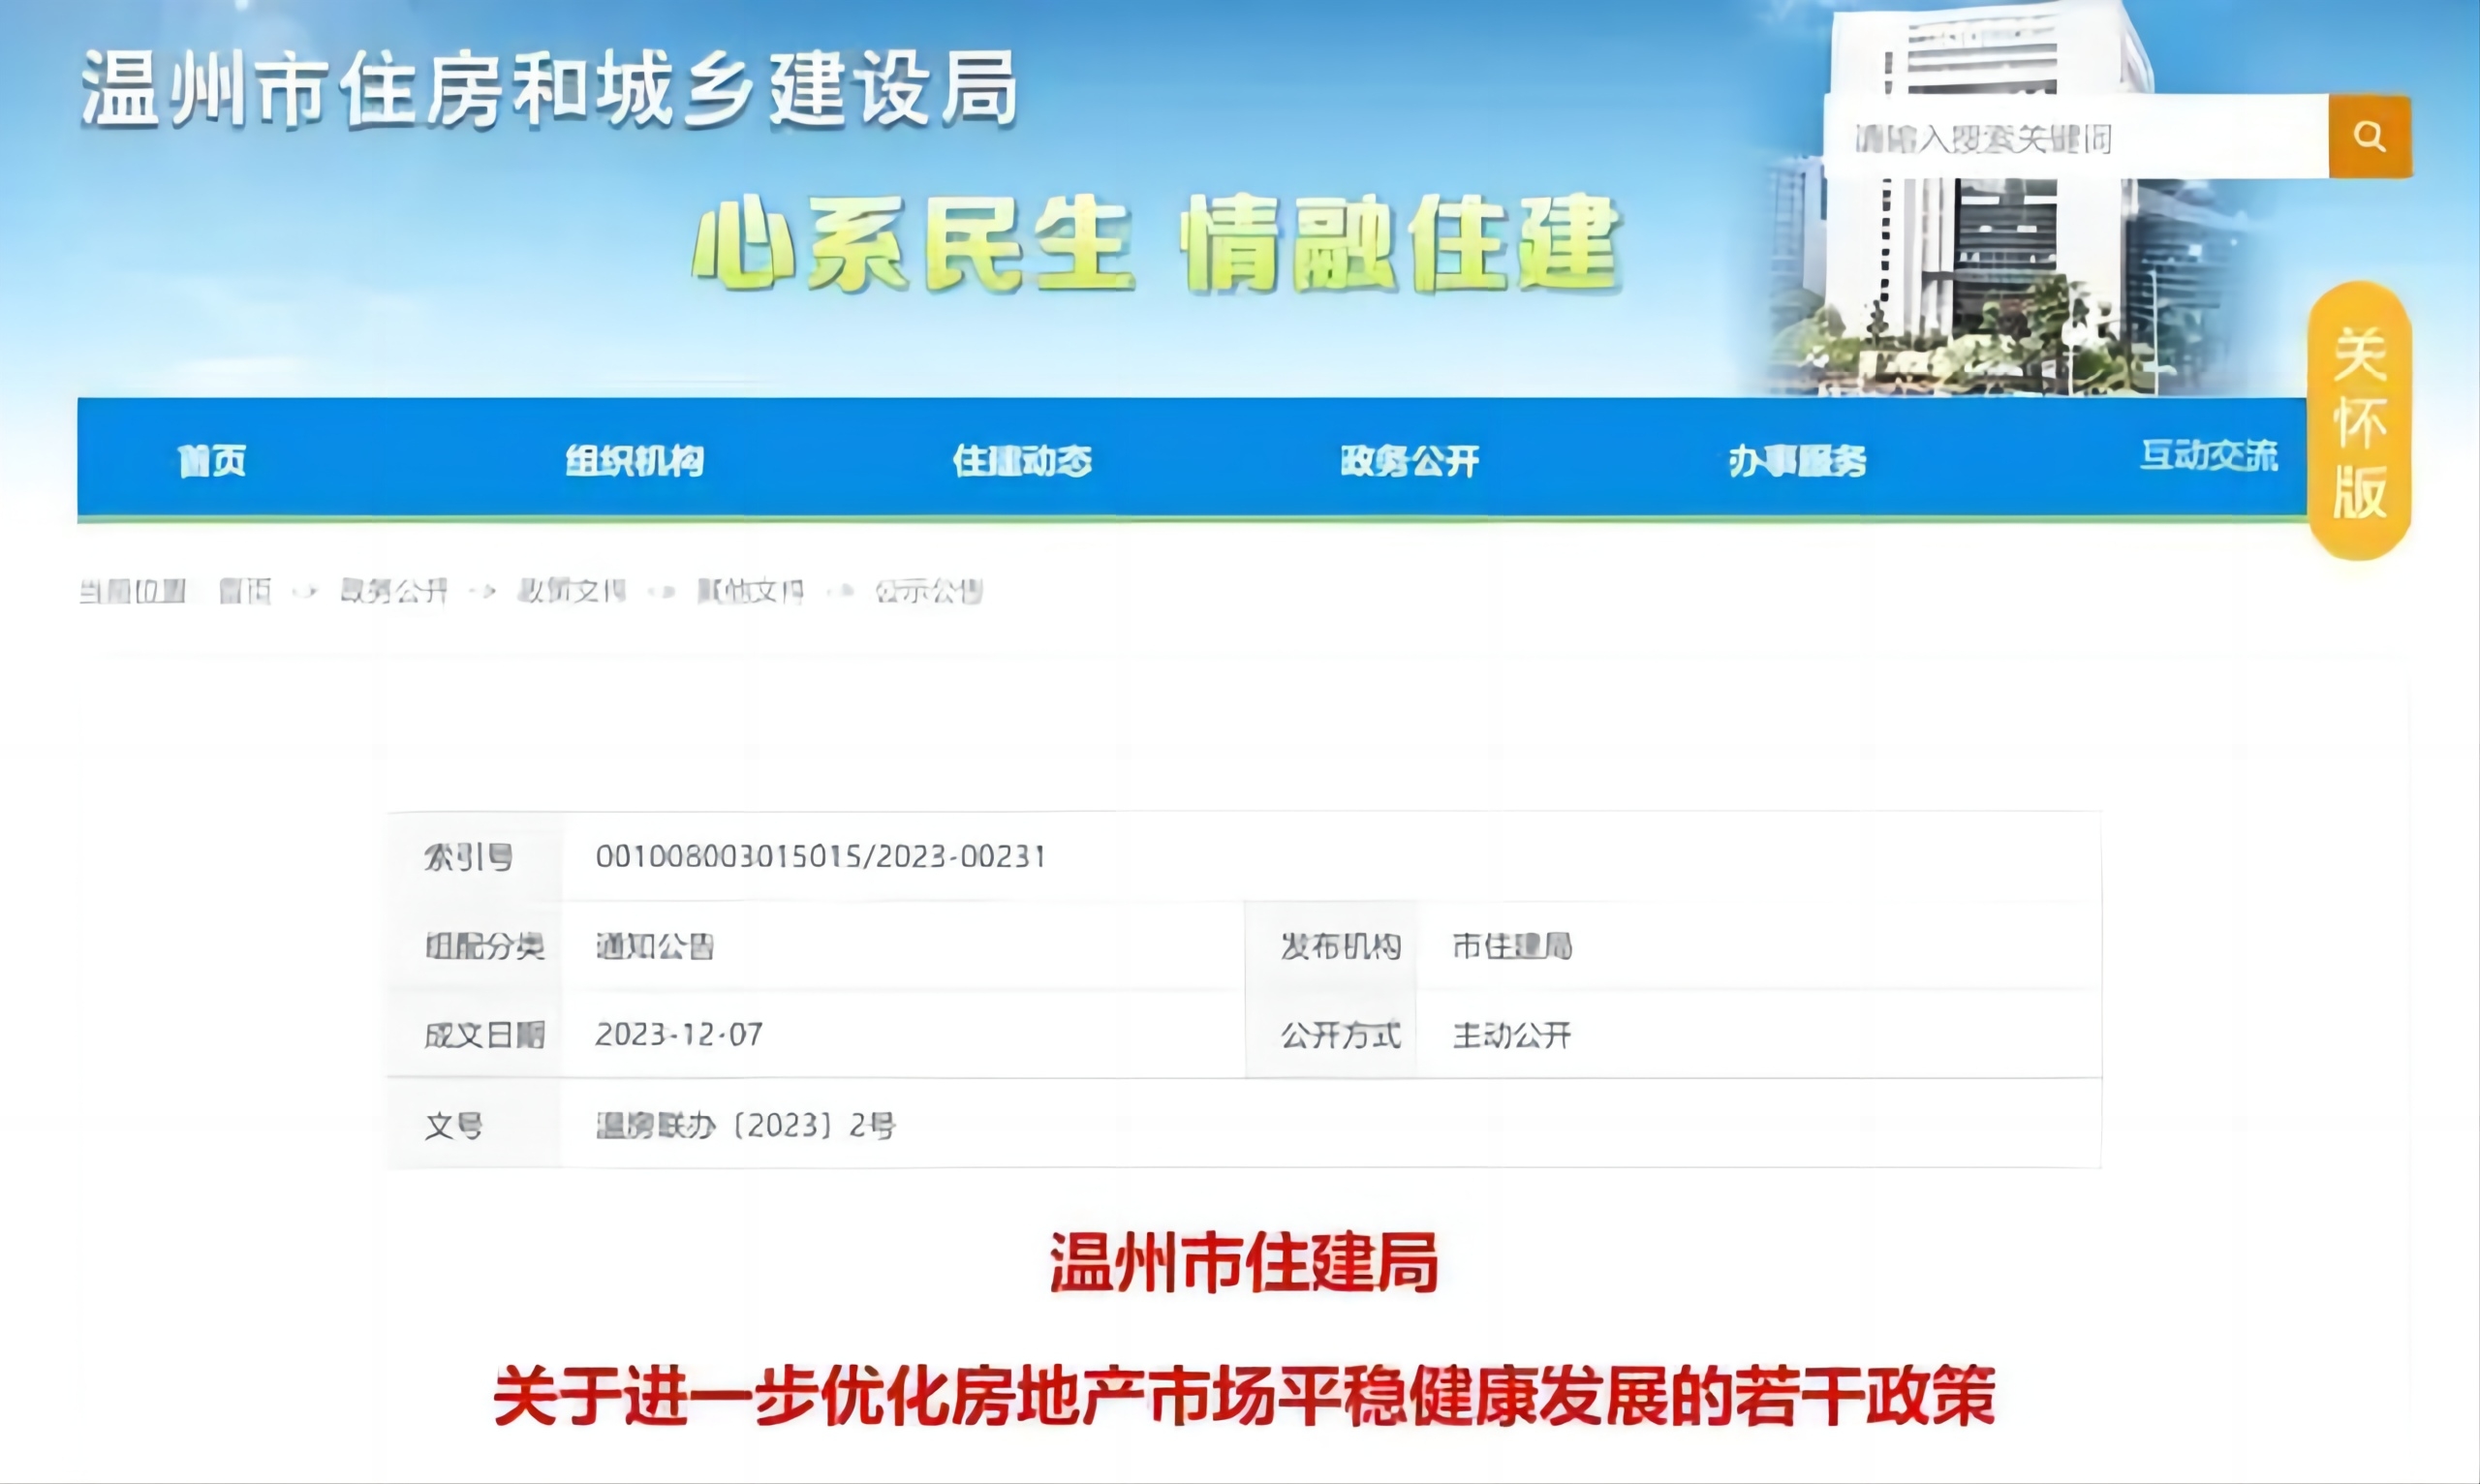 Wenzhou, Zhejiang： Explore ＂House Tickets＂ for the minimum down payment for the purchase fund of the down payment for house purchase to 30% to 30%